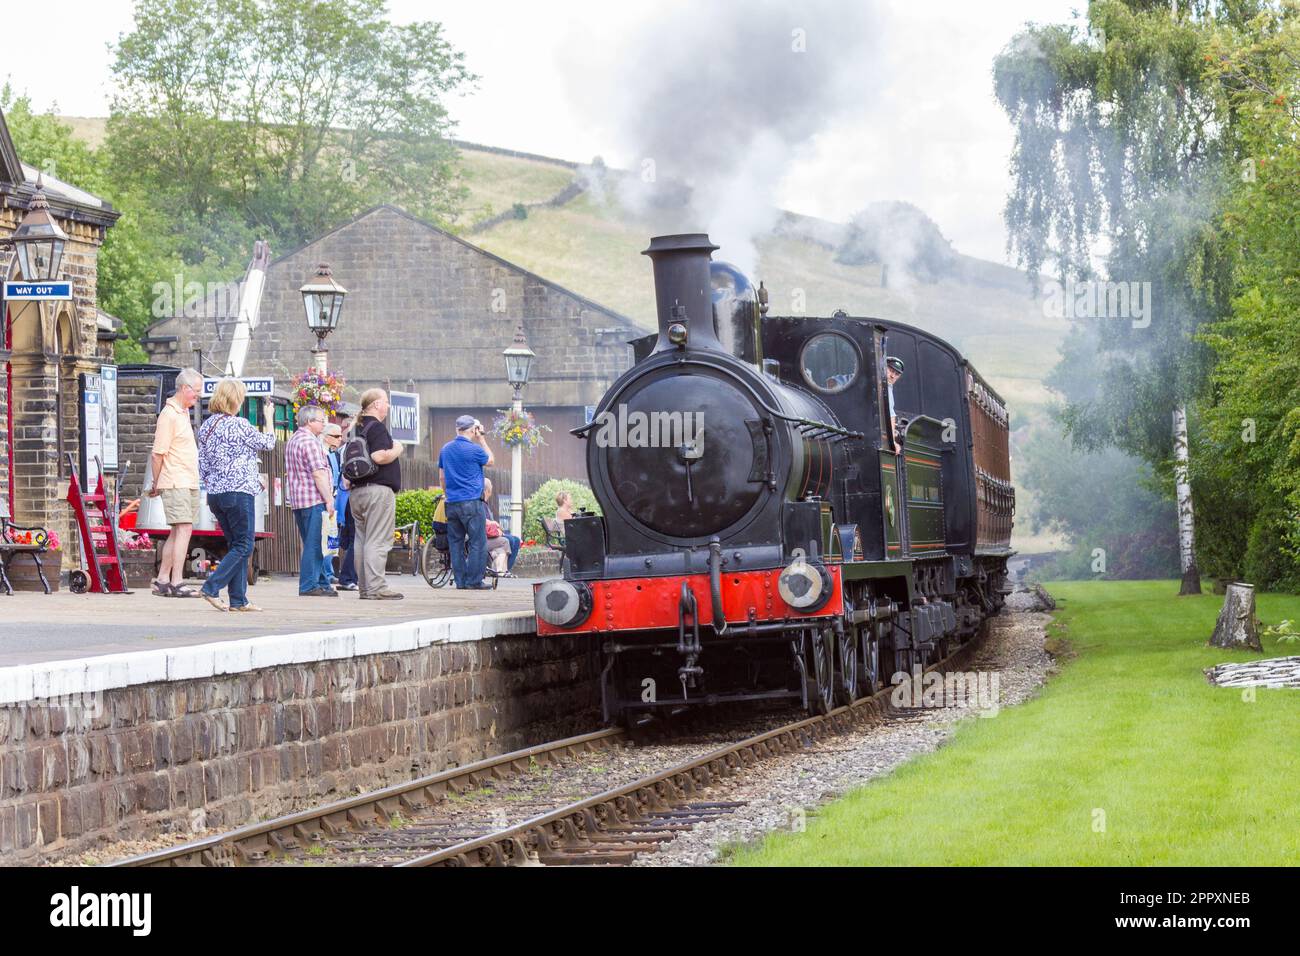 A Steam passenger train arriving at Oakworth on the Keighley & Worth Valley Railway (KWvR) Stock Photo